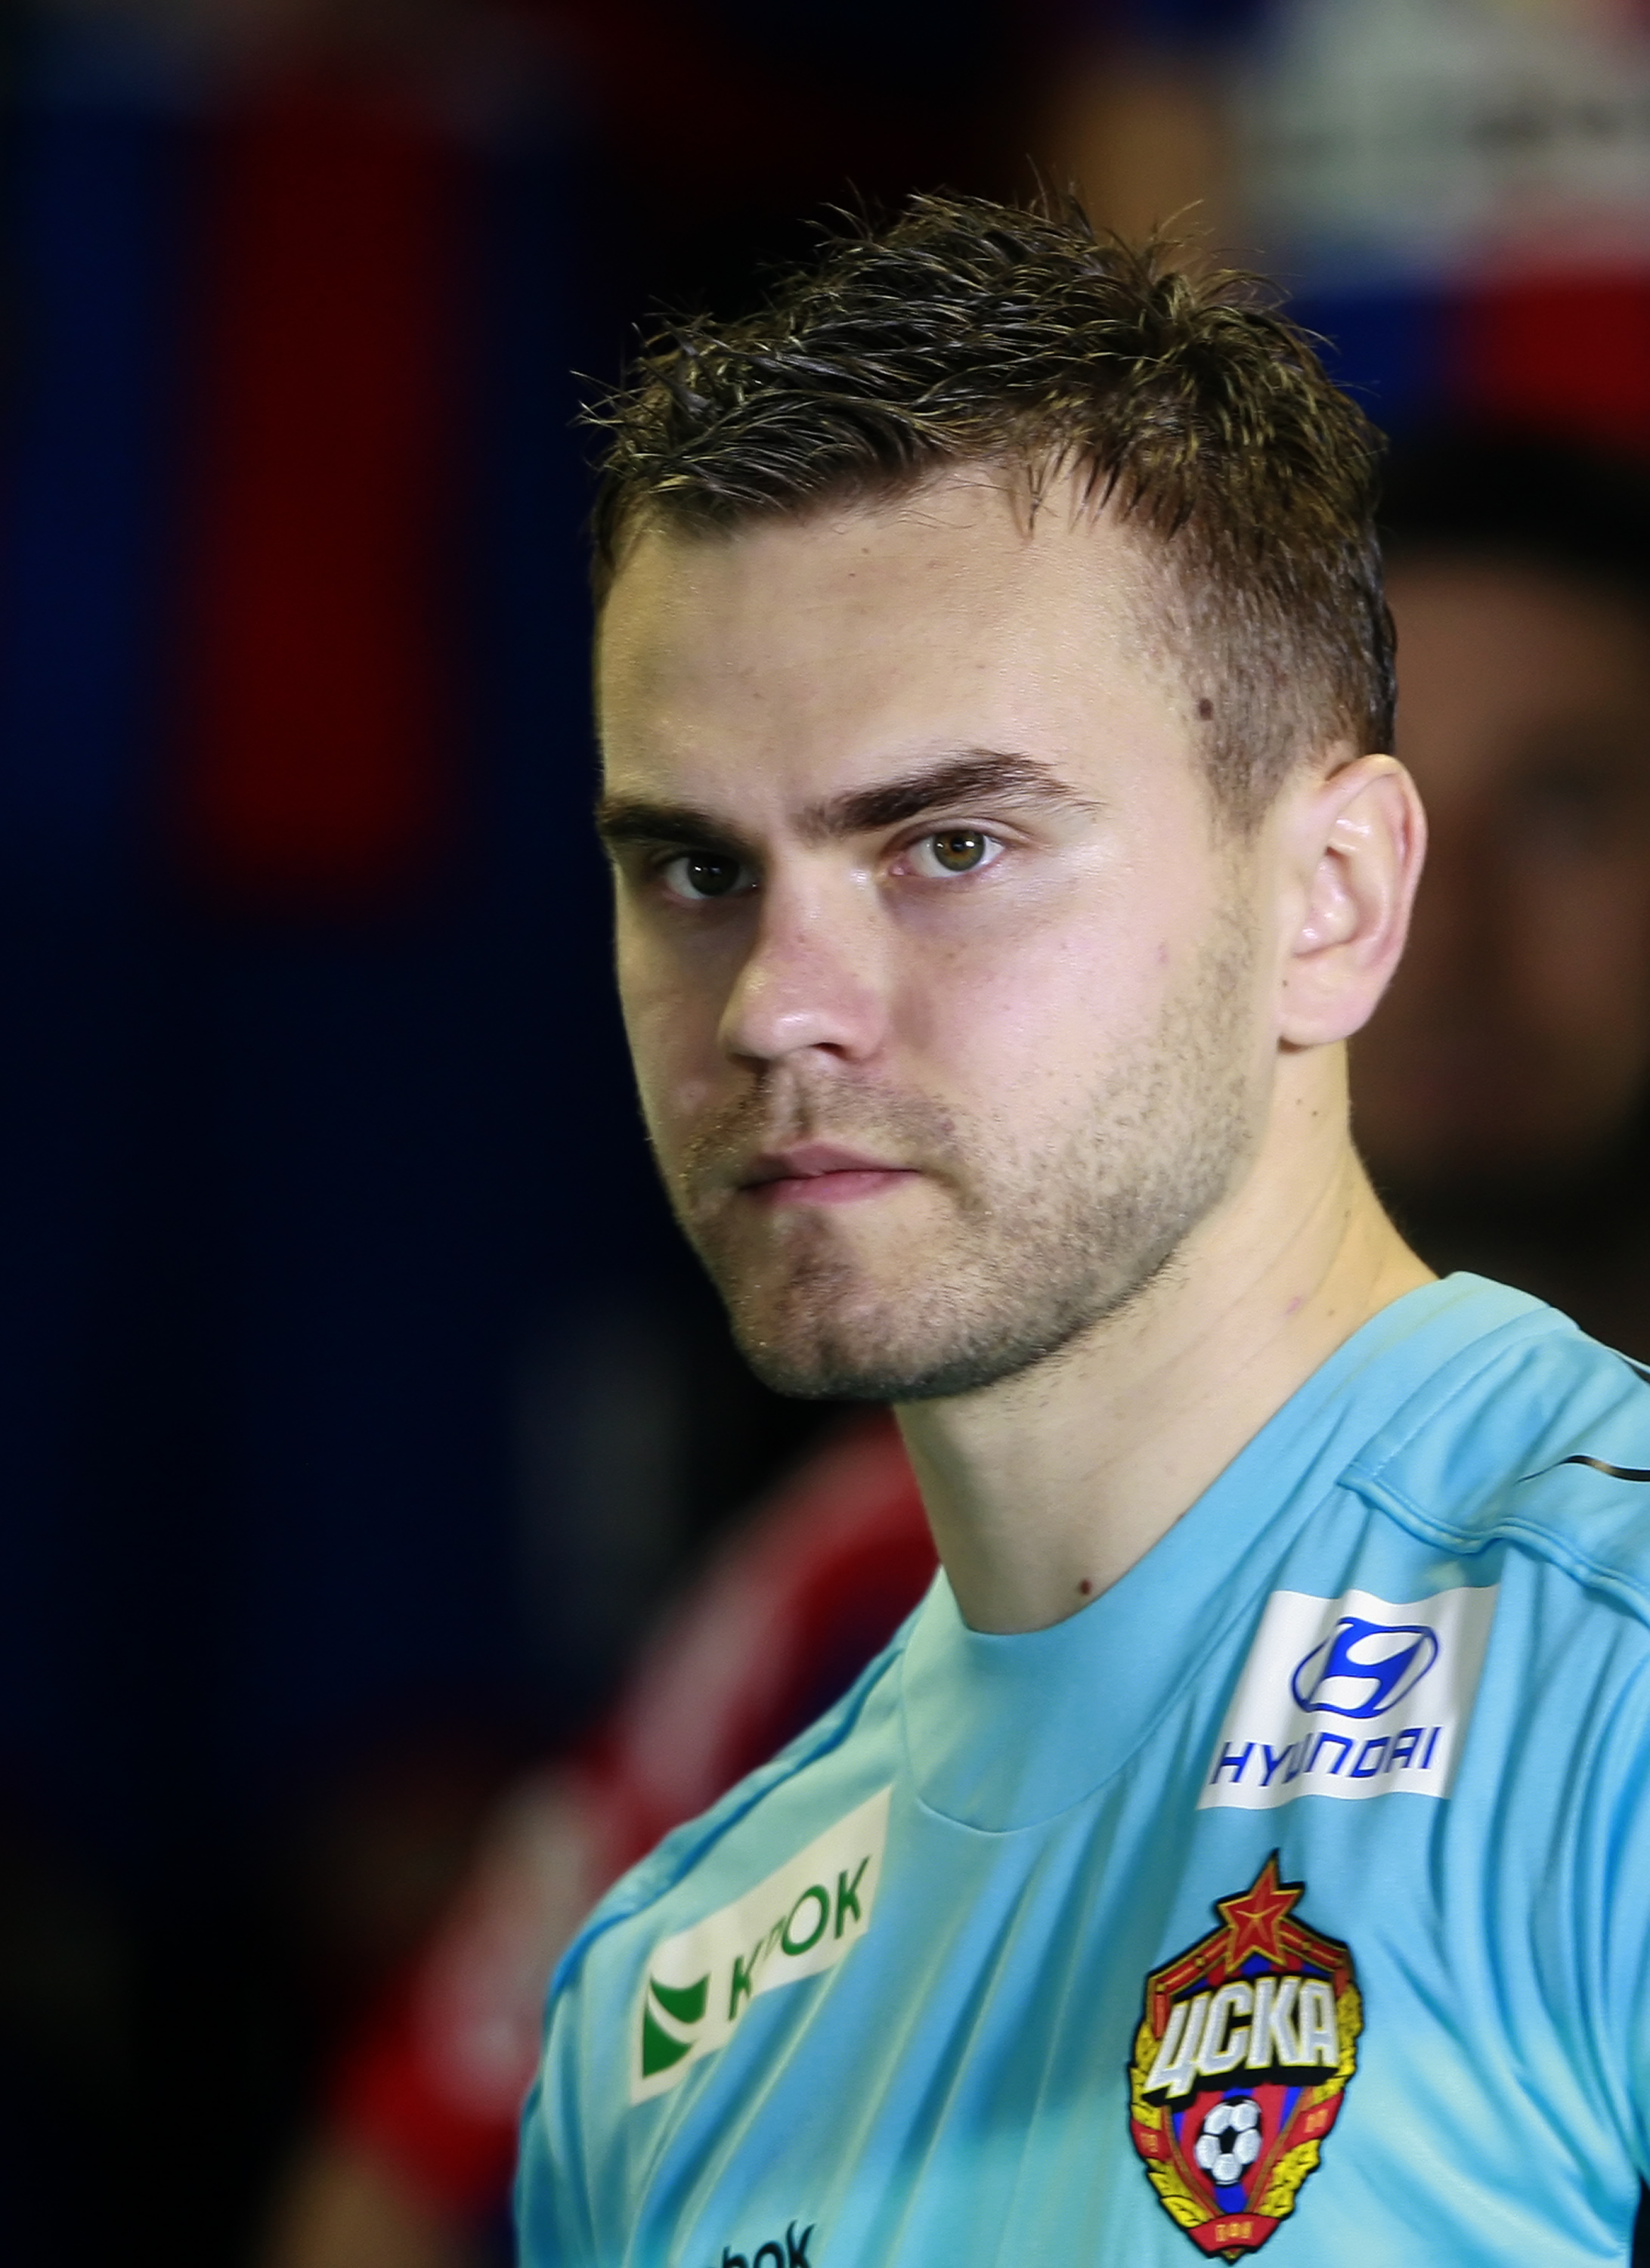 KHIMKI, RUSSIA - MAY 02: Igor Akinfeev of PFC CSKA Moscow looks on during the Russian Football League Championship match between PFC CSKA Moscow and FC Tom Tomsk at the Khimki Stadium on May 02, 2010 in Khimki, Russia.  (Photo by Dmitry Korotayev/Epsilon/